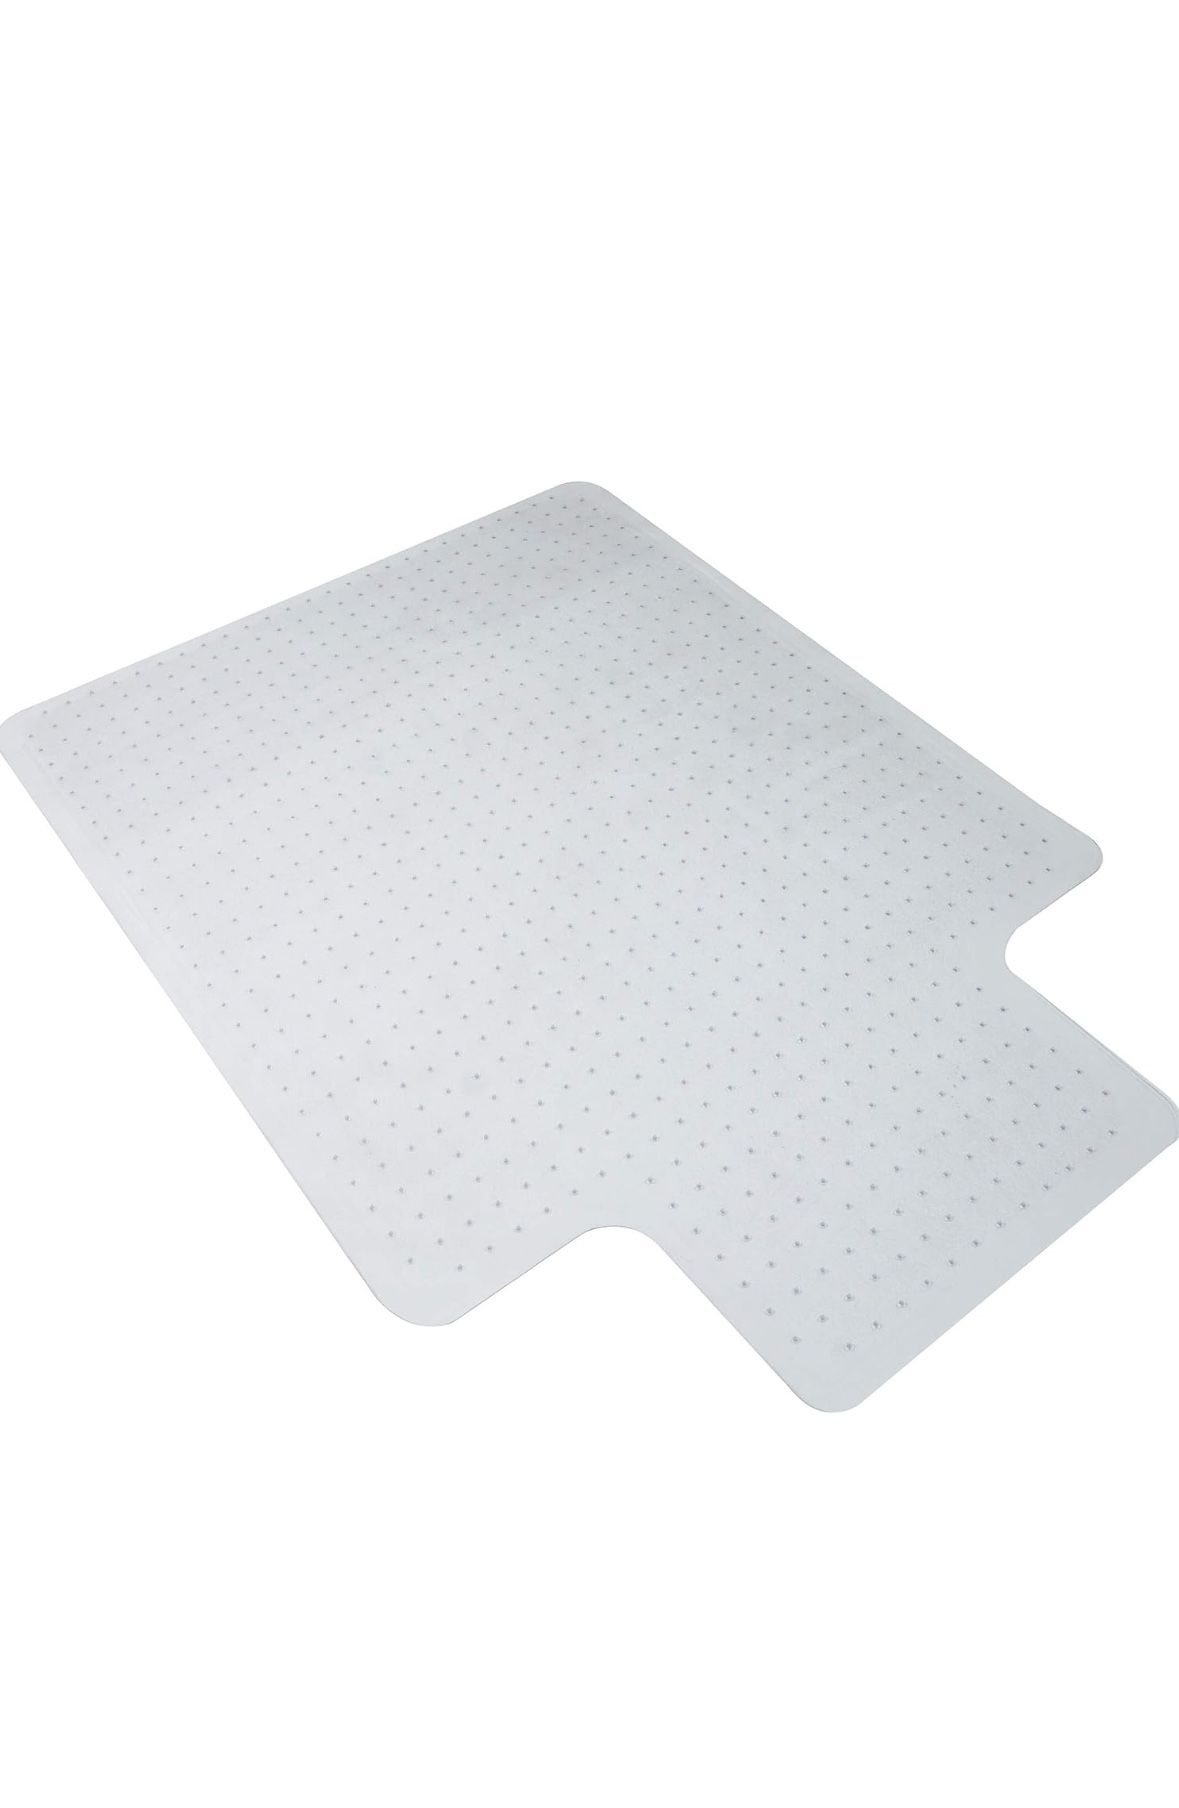 High quality thick Office Chair Mat 